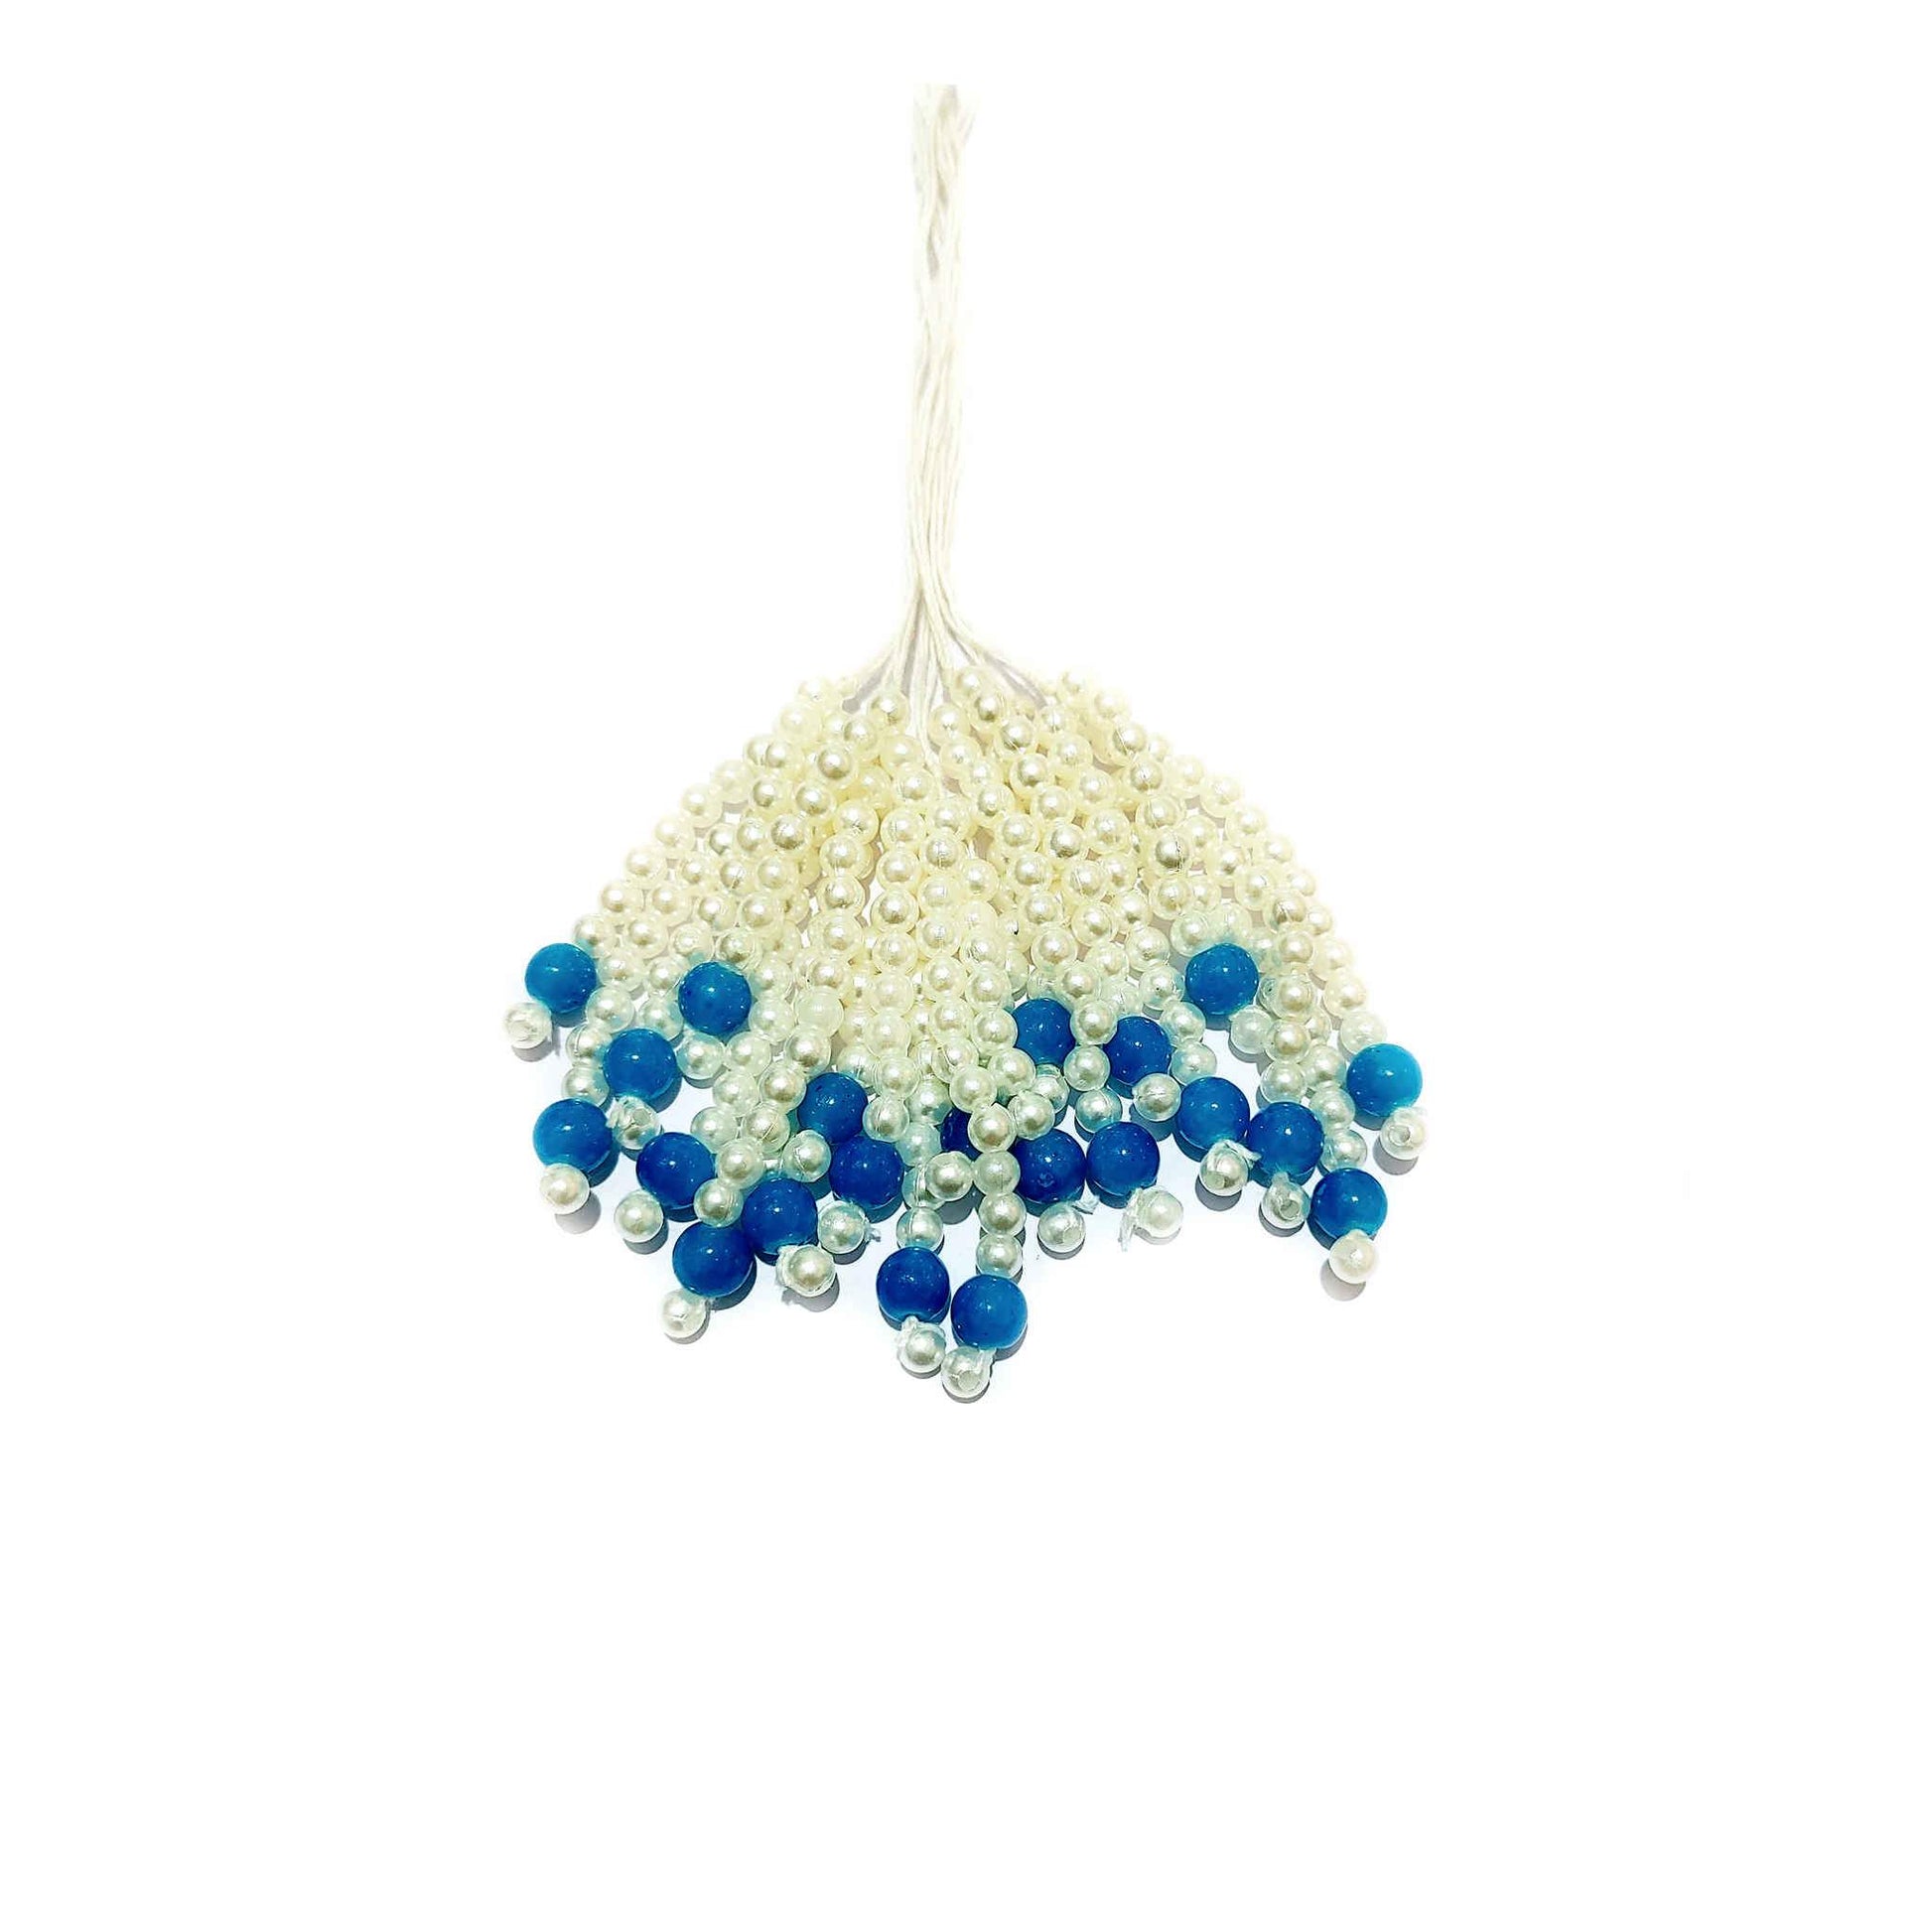 Indian Petals Mini Pearl Beads Handmade DIY Craft, Jewelry Fringe Tassel with Colored Beads - Design 826, Blue